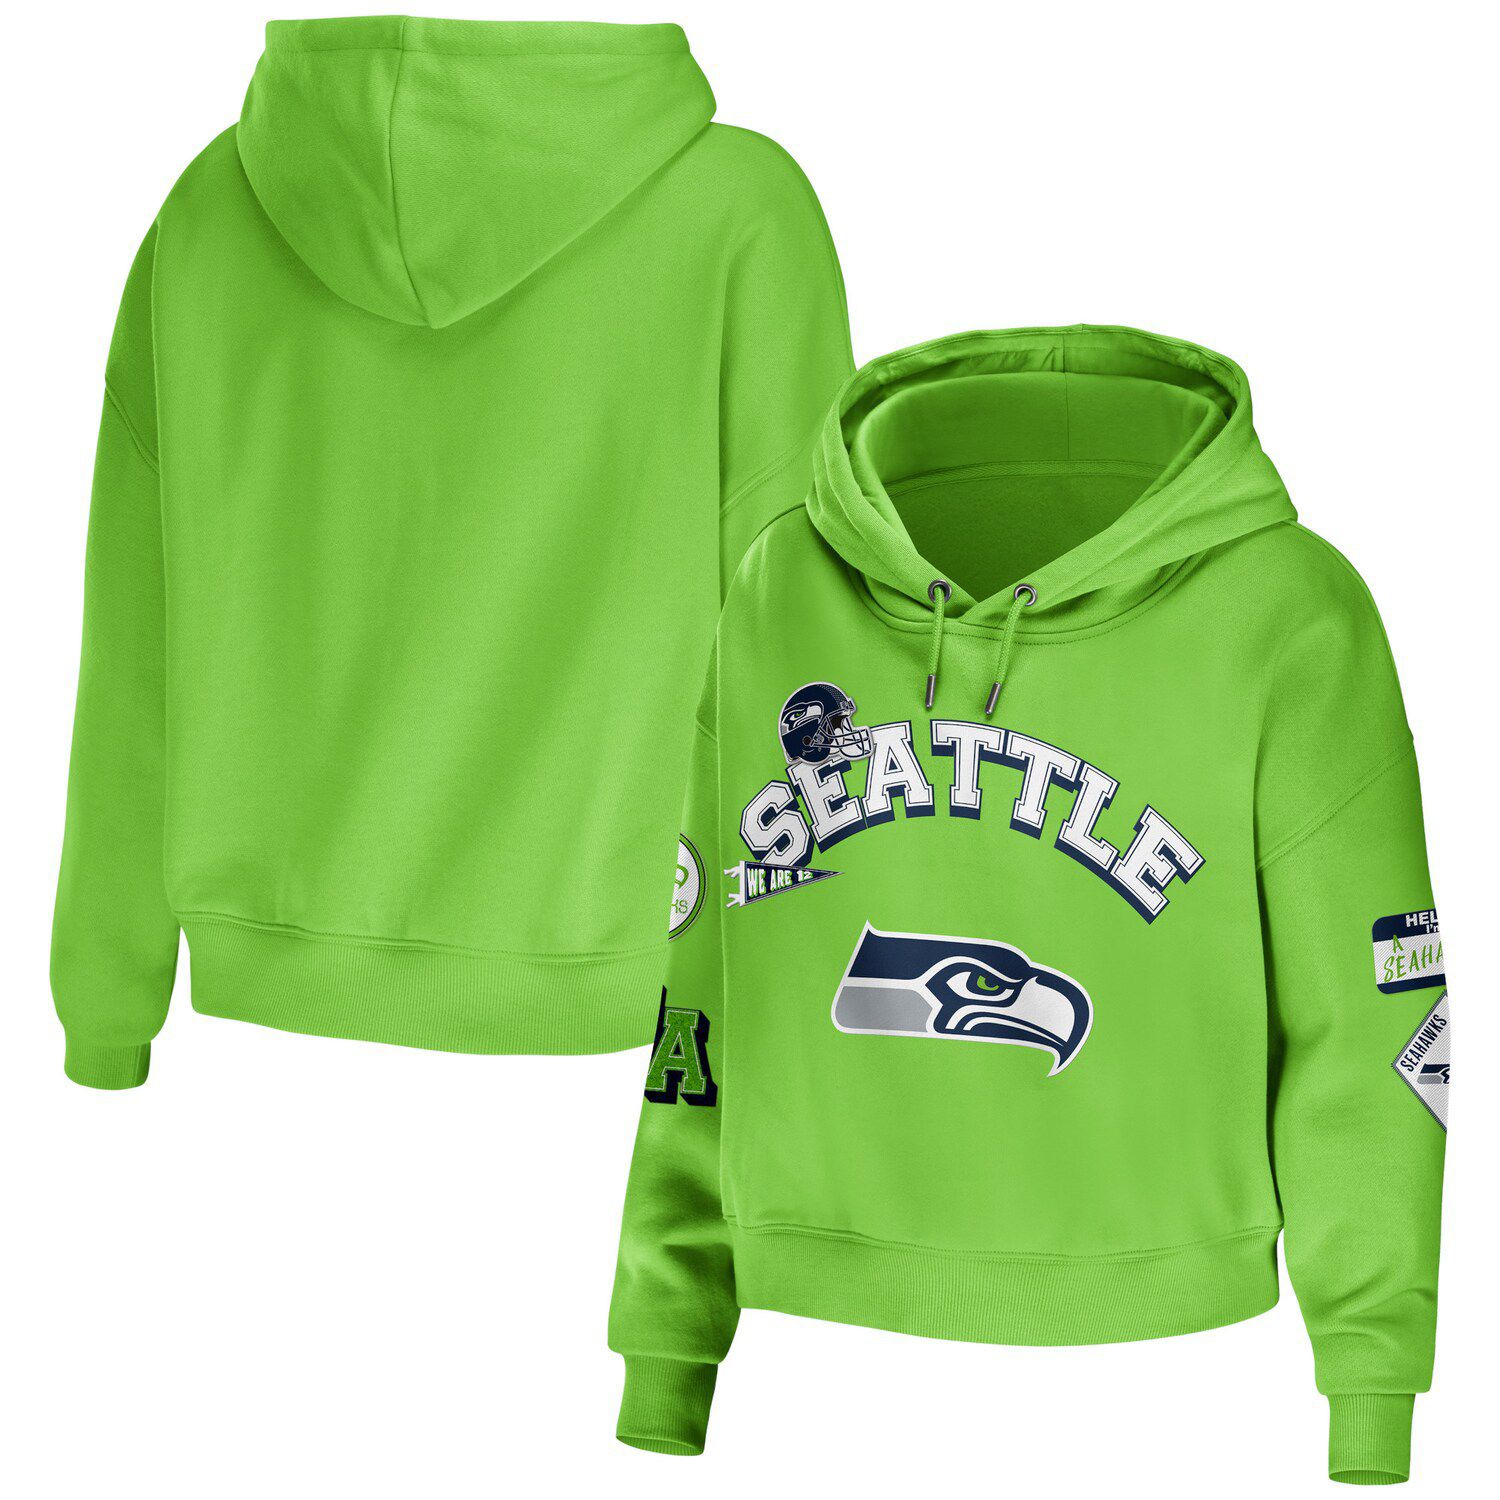 Women's Fanatics Branded College Navy/Neon Green Seattle Seahawks Colors of Pride Colorblock Pullover Hoodie